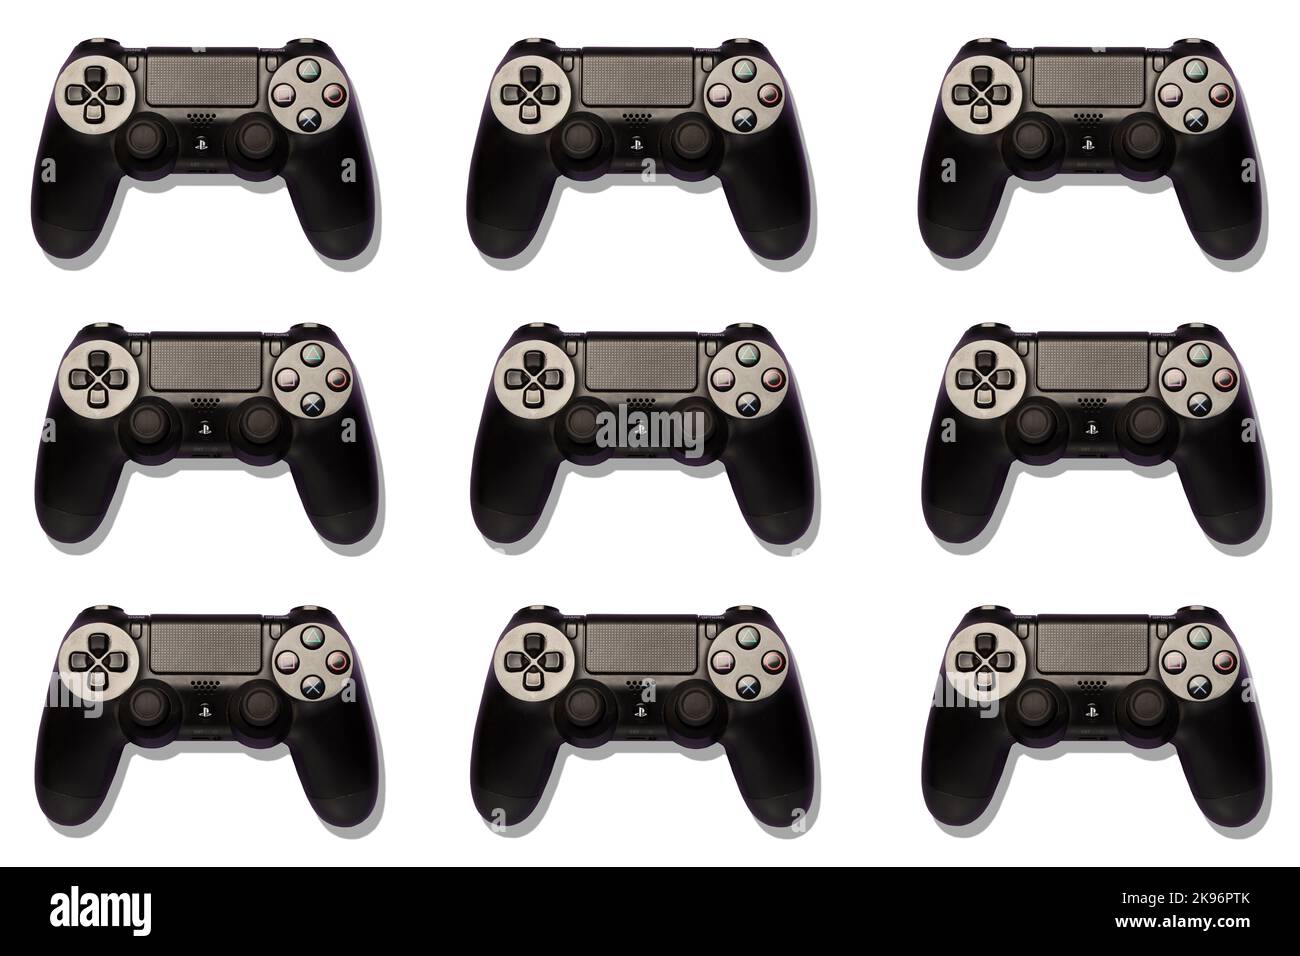 top view of playstation joypads on a colourful background, repetition, pattern, pop, professional studio shot, gaming, gamers, players Stock Photo